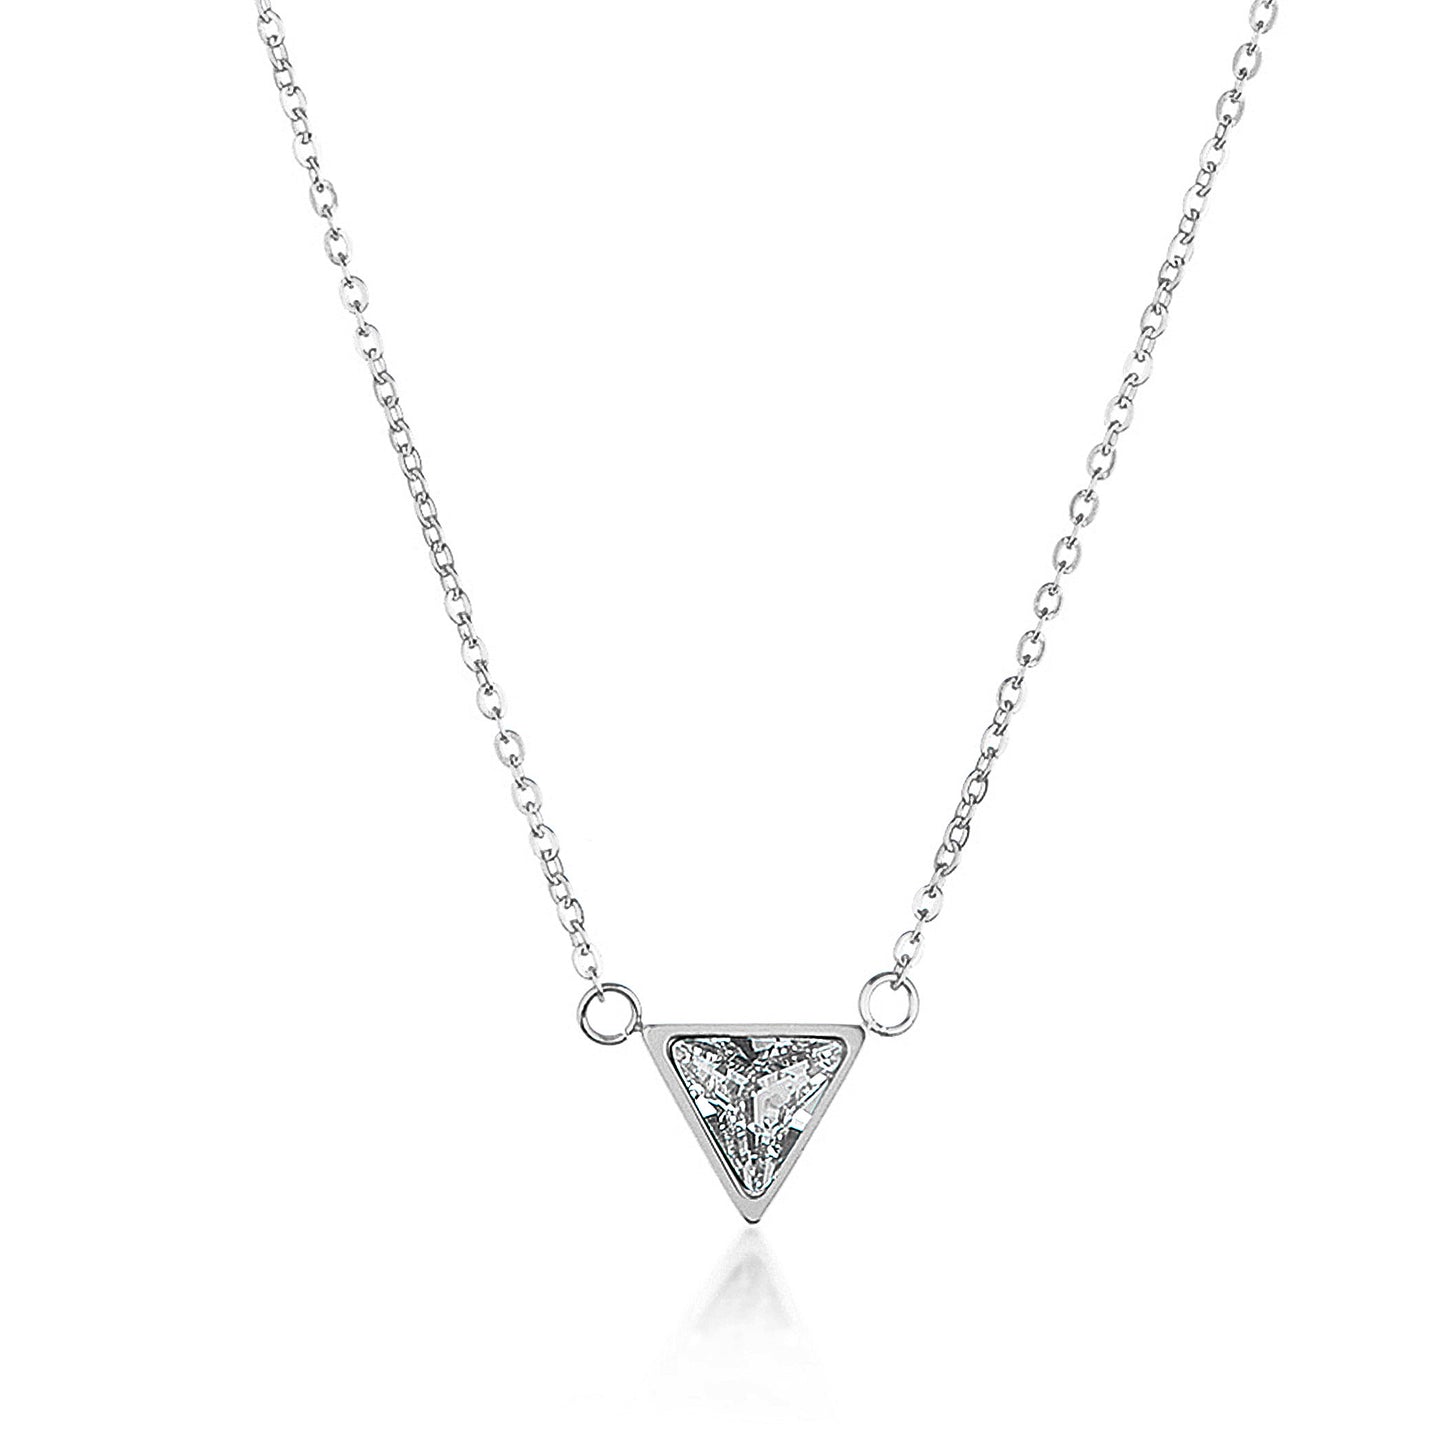 ELYA Women's Triangle Cut Cubic Zirconia Stainless Steel Cable Chain Pendant Necklace